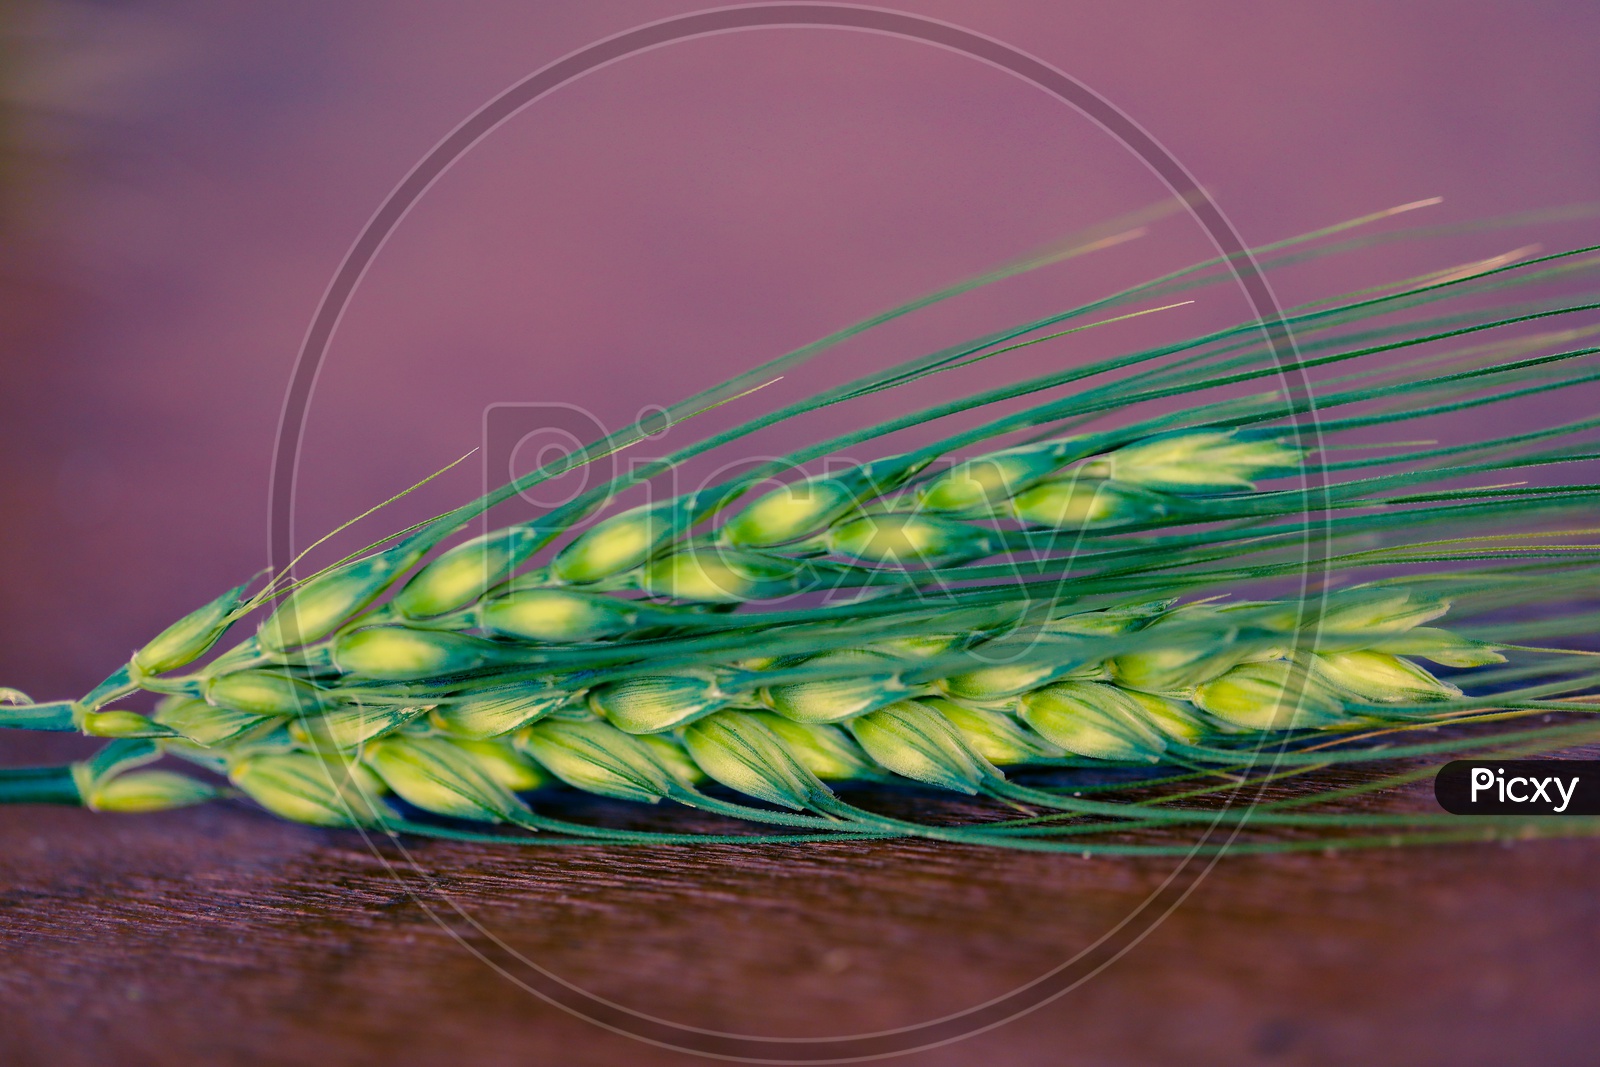 Young  Green  Wheat Ears Or Spikelets  on a Wooden Table